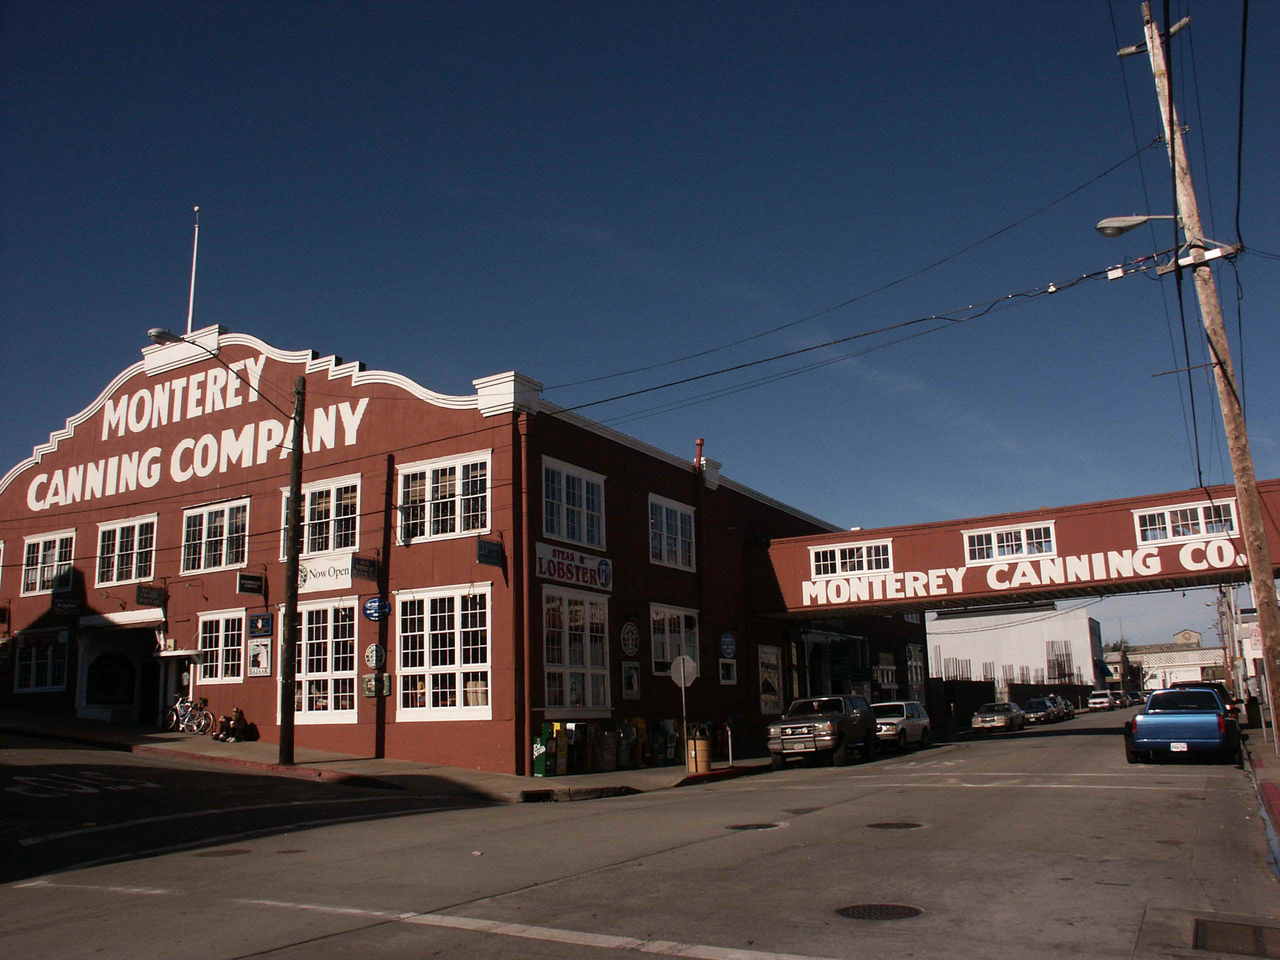 steinbeck cannery